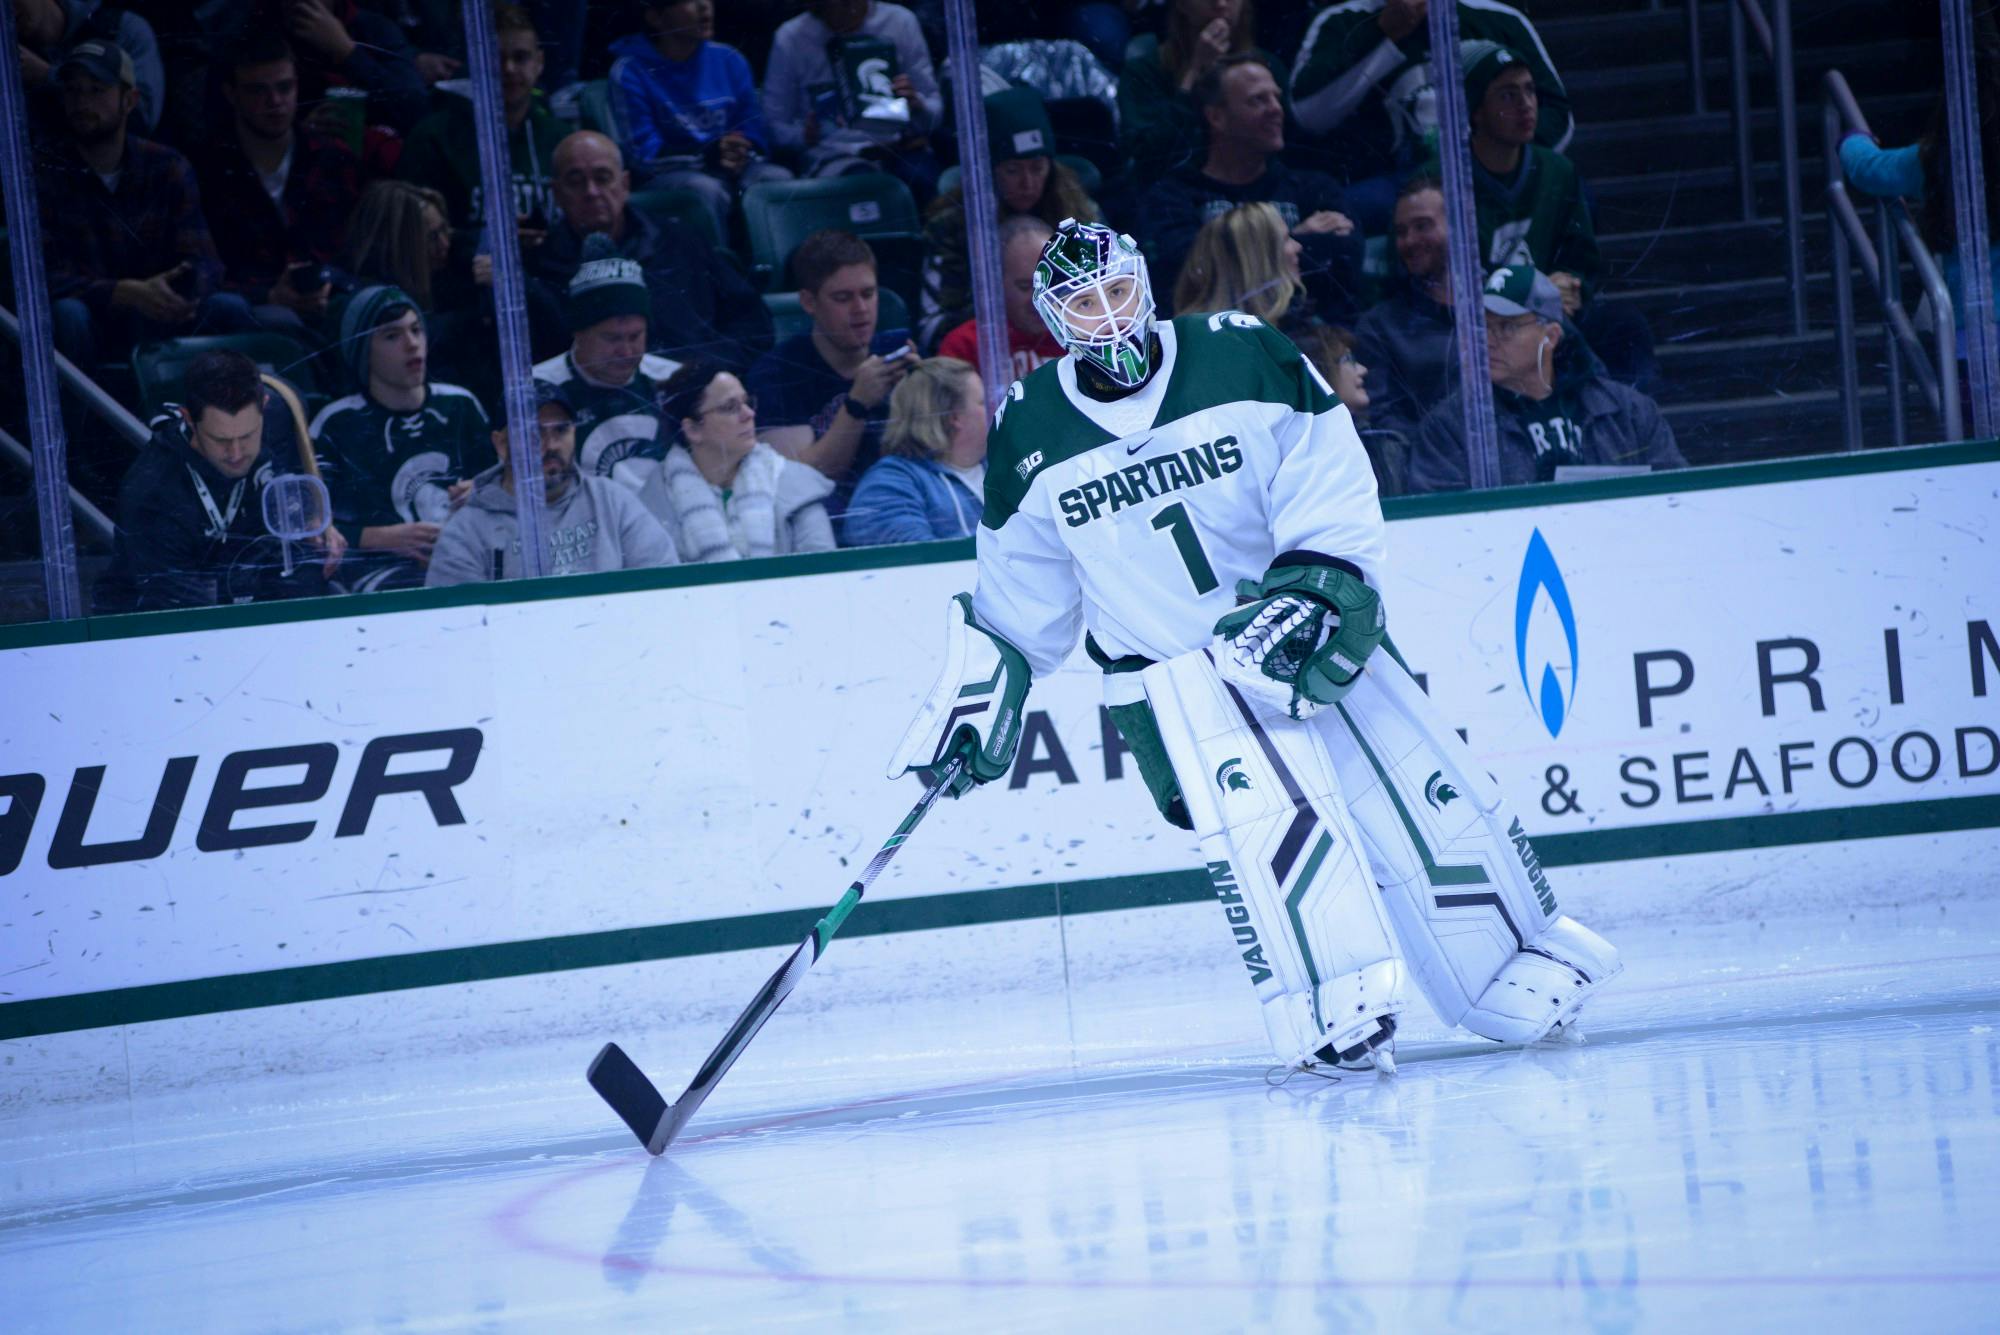 <p>Sophomore goalie Drew DeRidder (1) during the game against Cornell at Munn Ice Arena on Nov. 2, 2019. The Spartans lost to the Big Red, 6-2.</p>